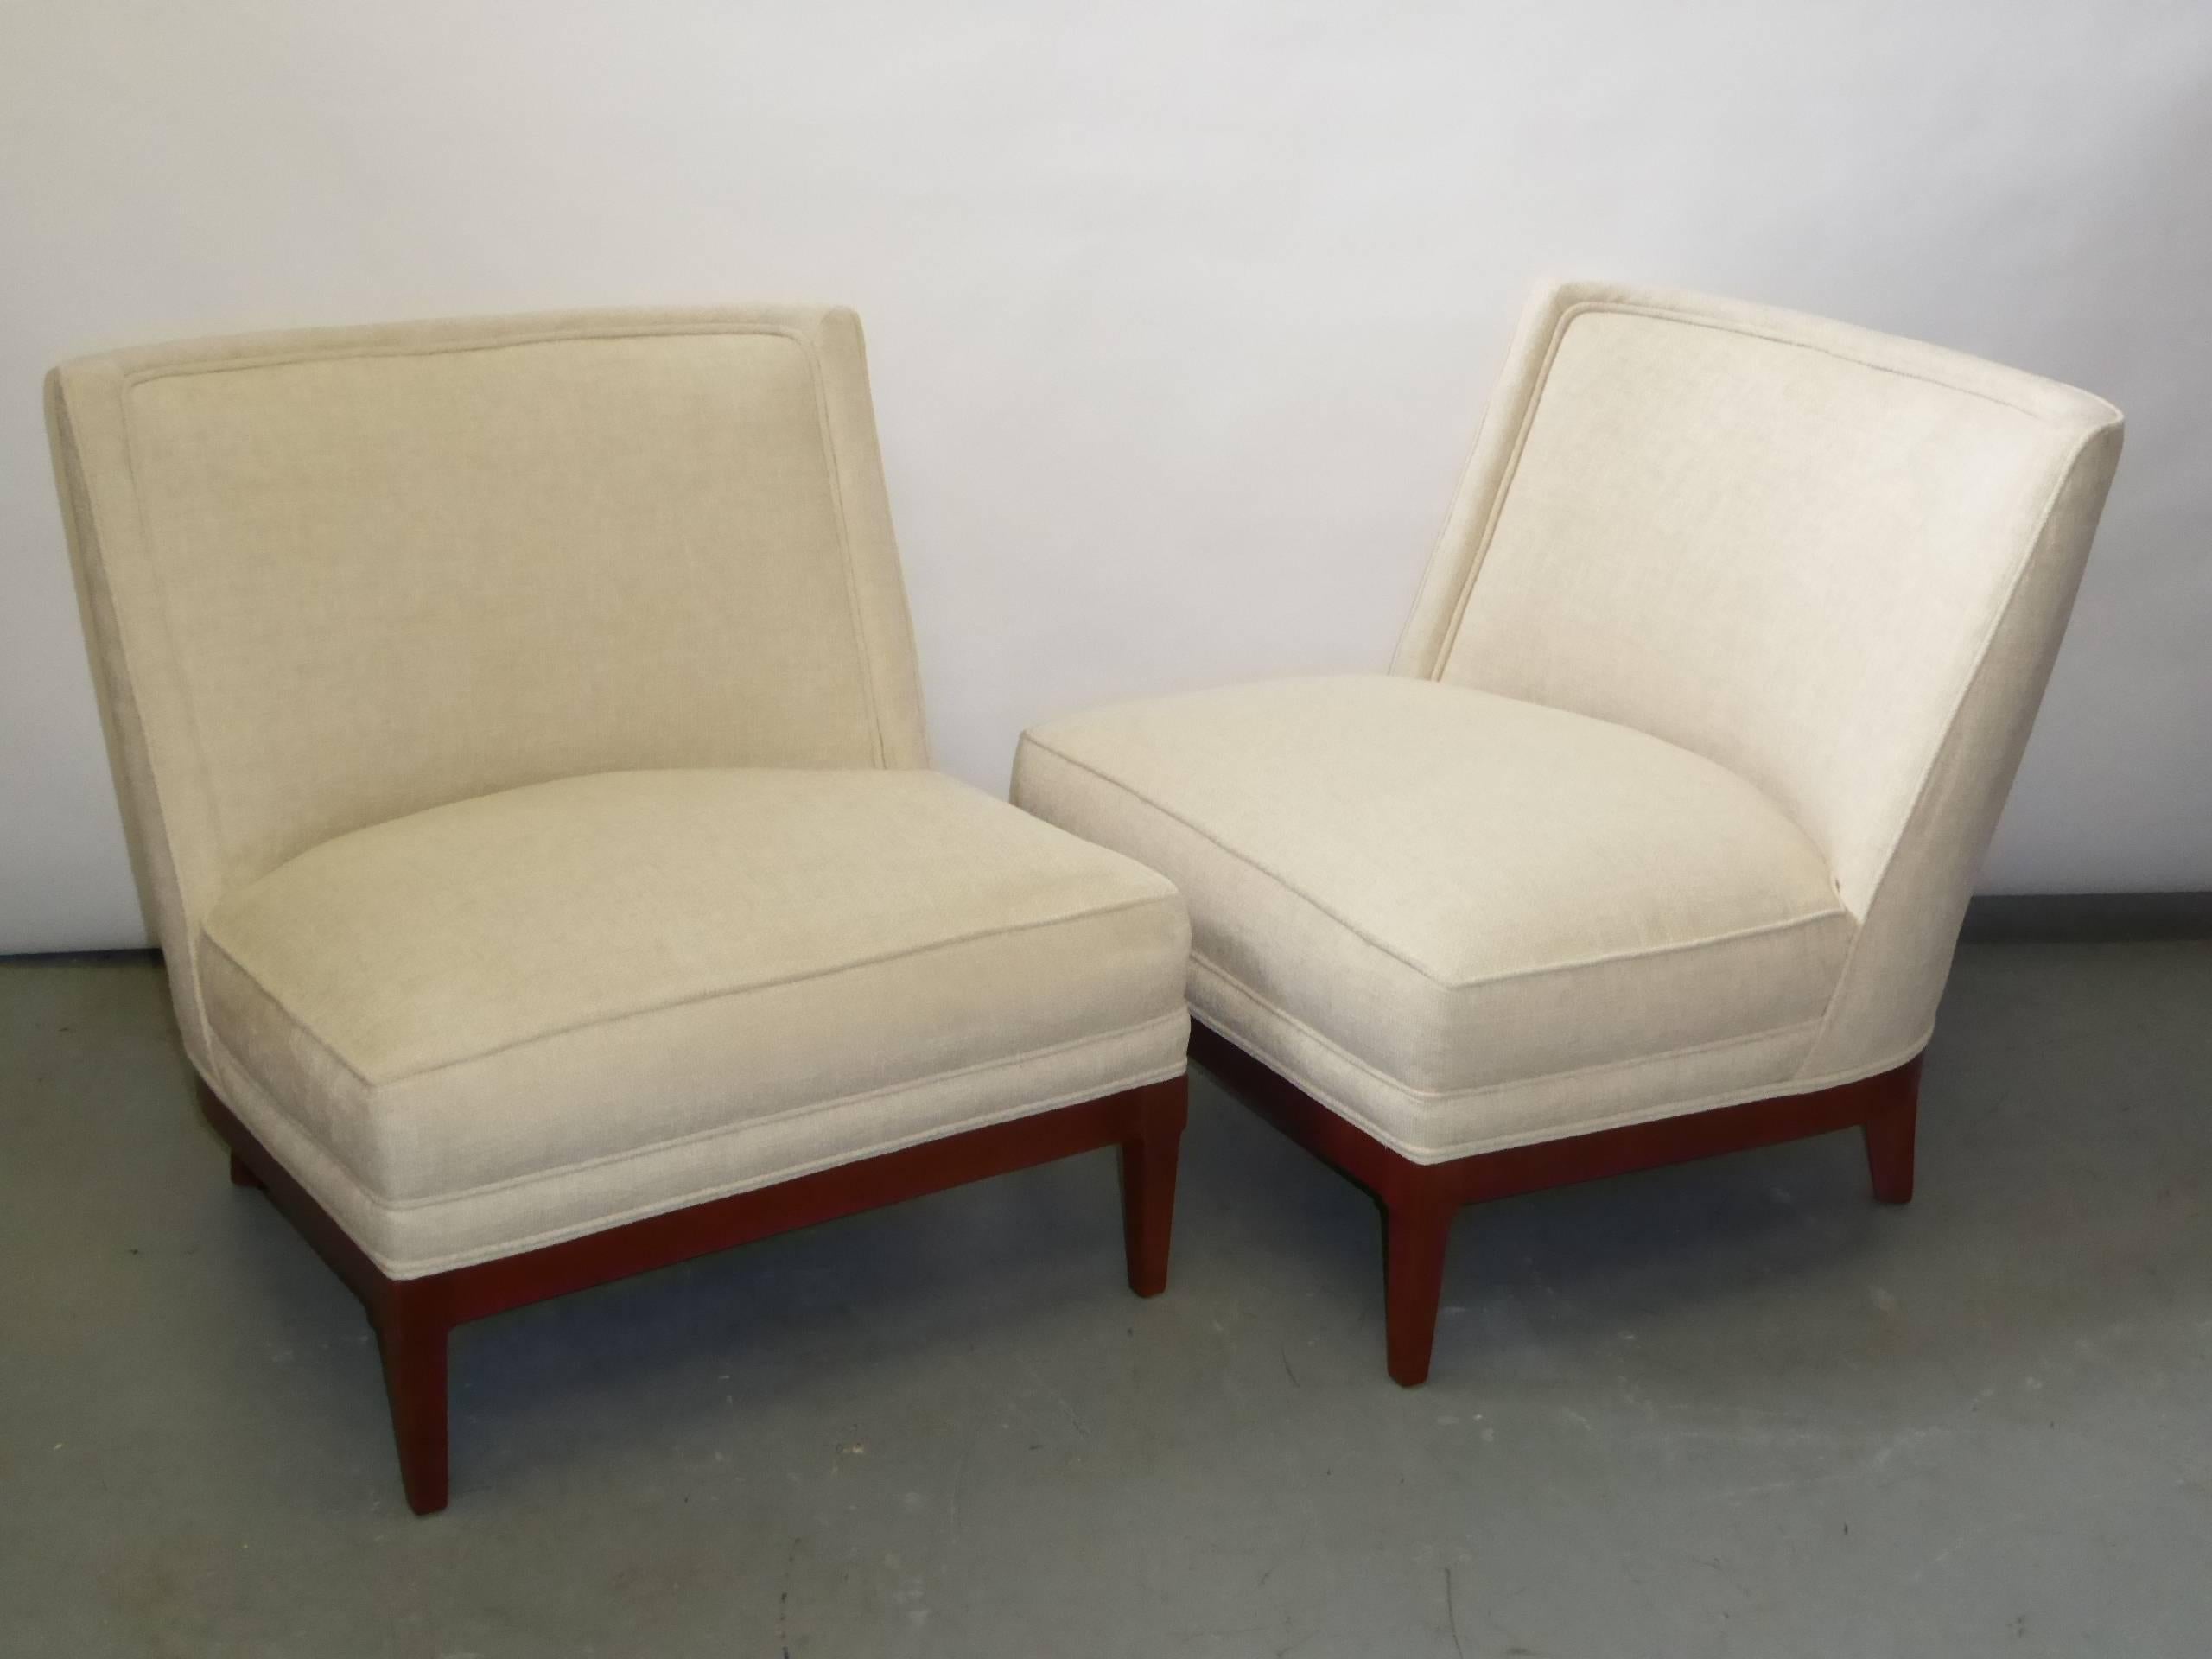 Hollywood Regency  PAIR Sophisticated 1940s Slipper Lounge Chairs